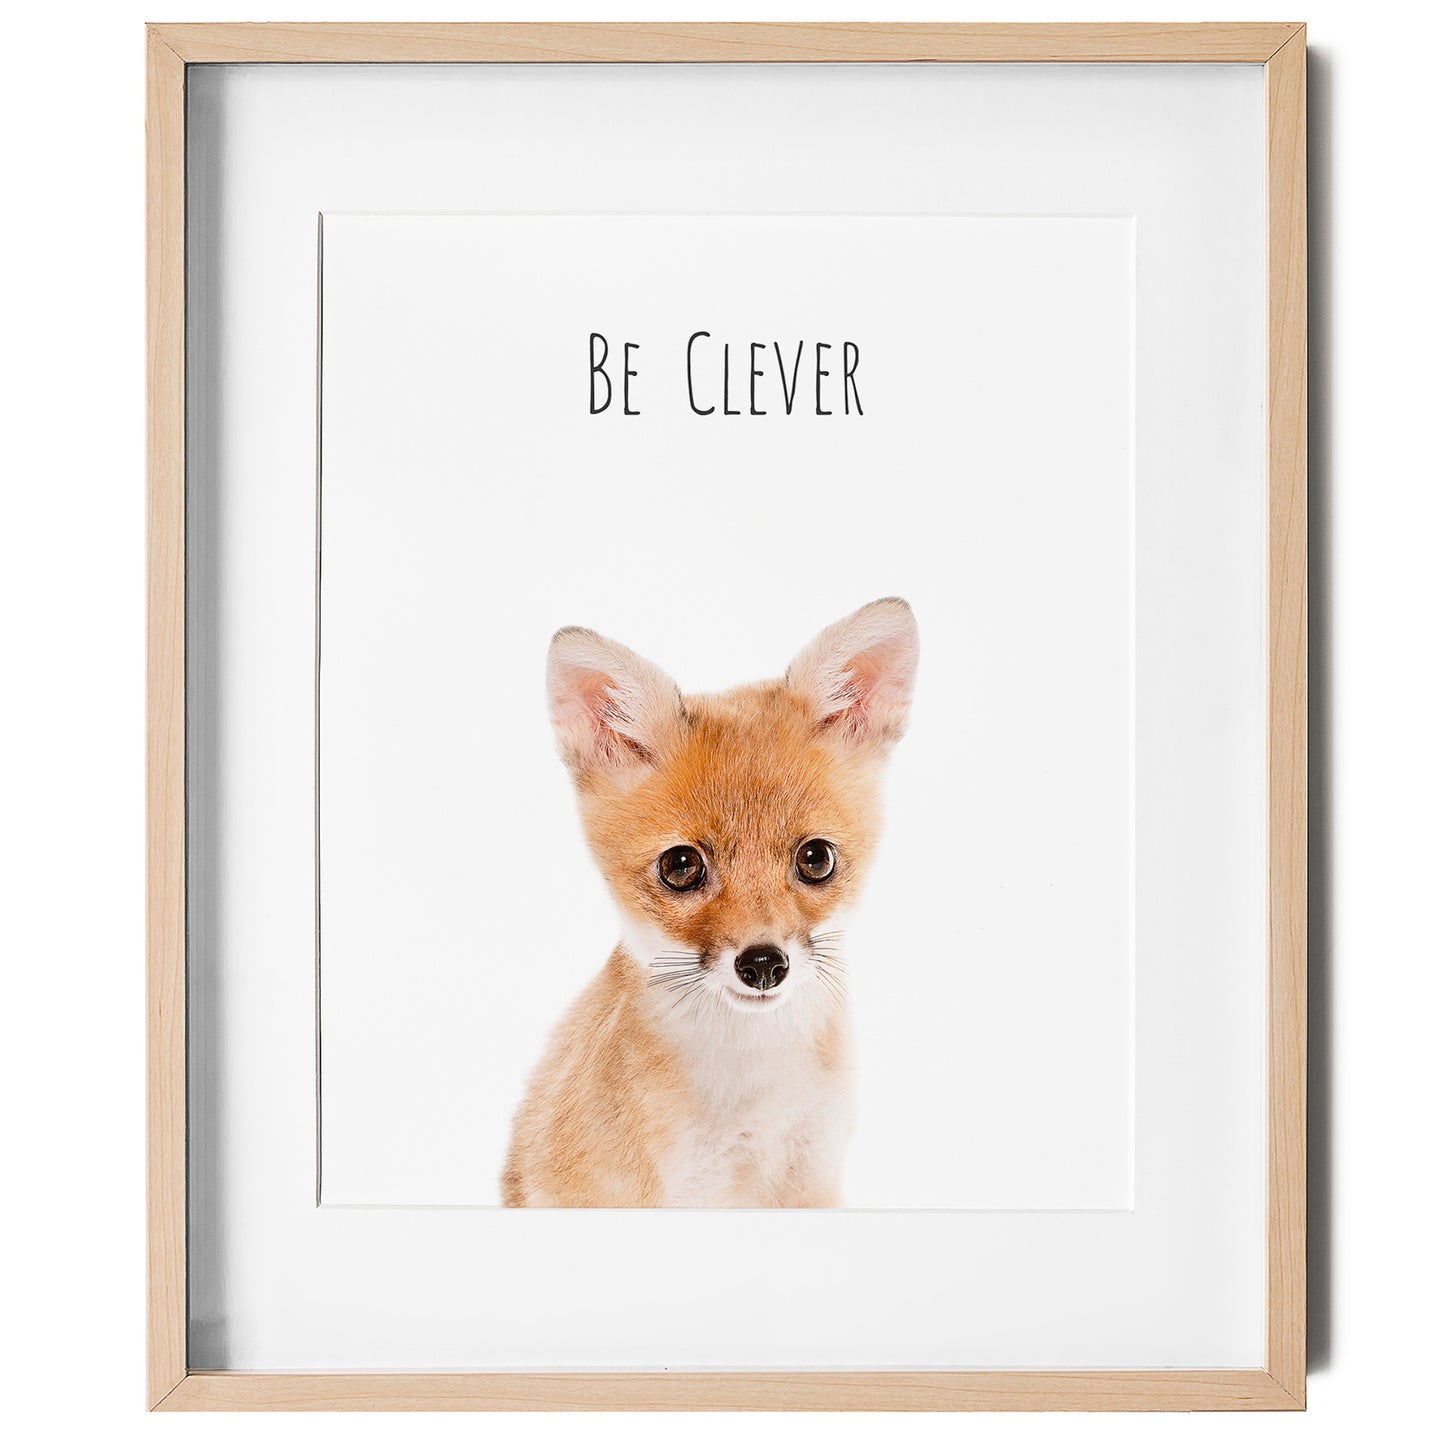 A picture of a baby fox with the words "Be Cleaver" in a girls nursery